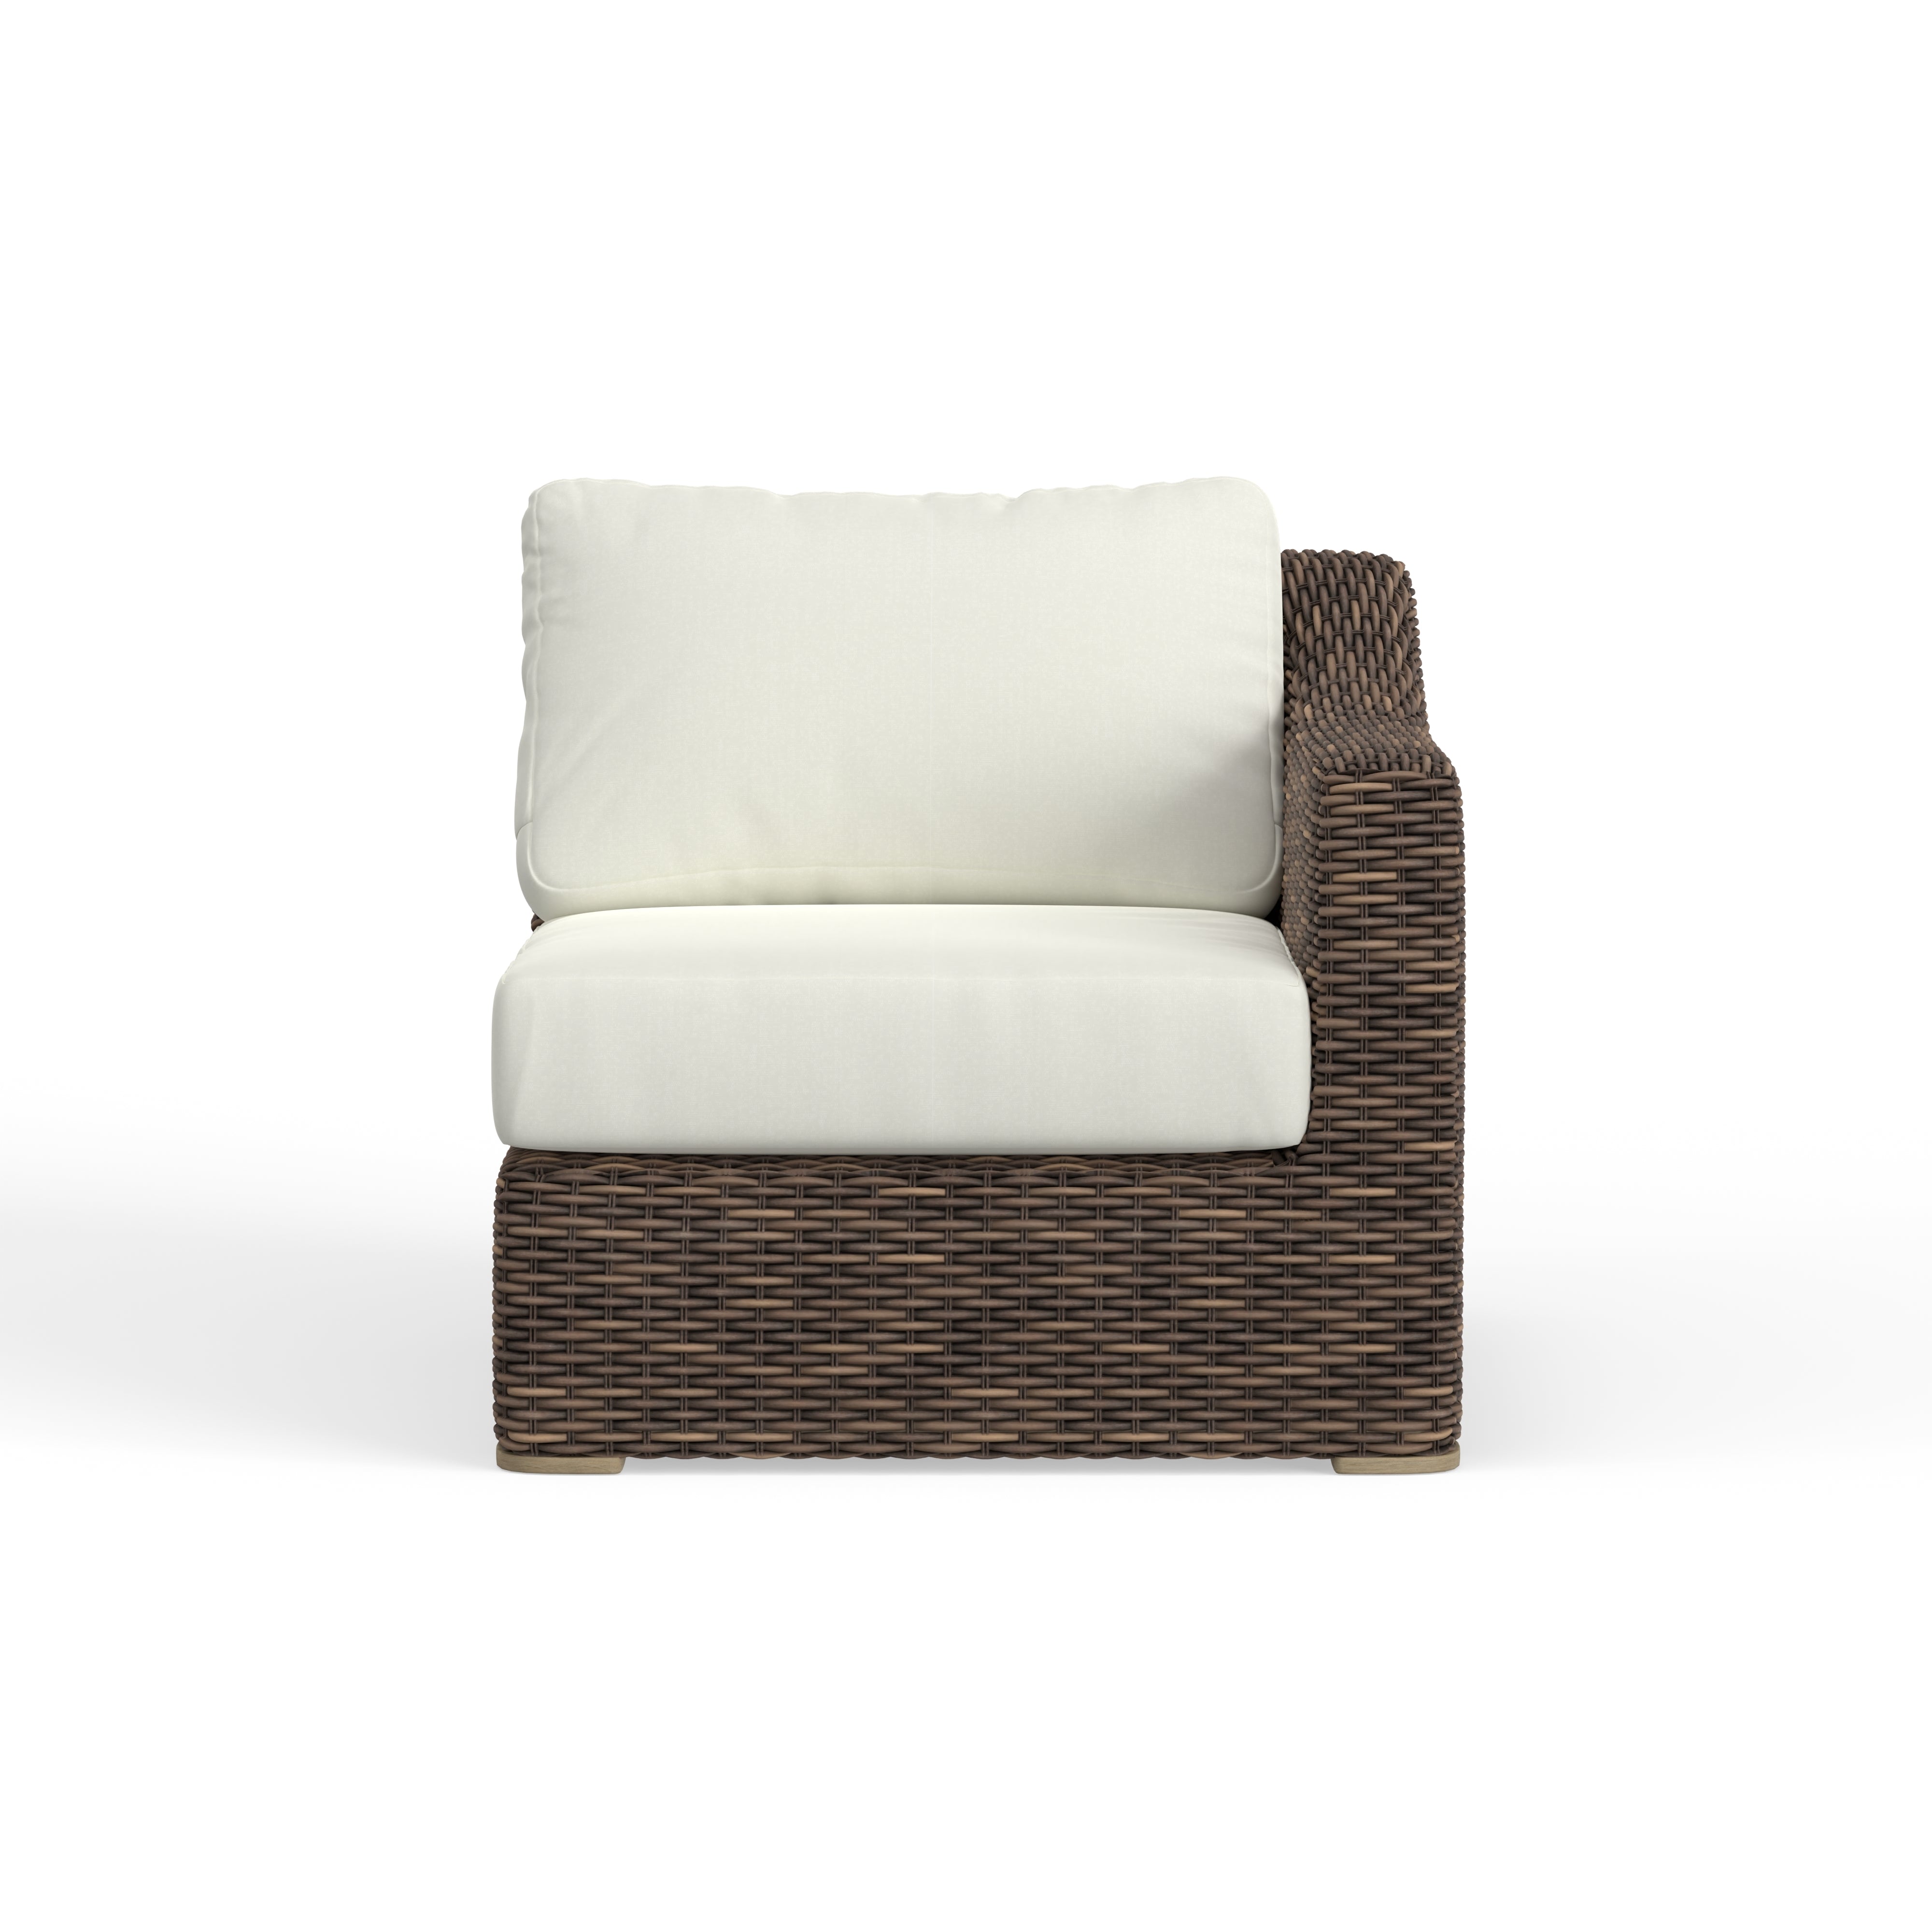 Brown Wicker Sectional Left Arm